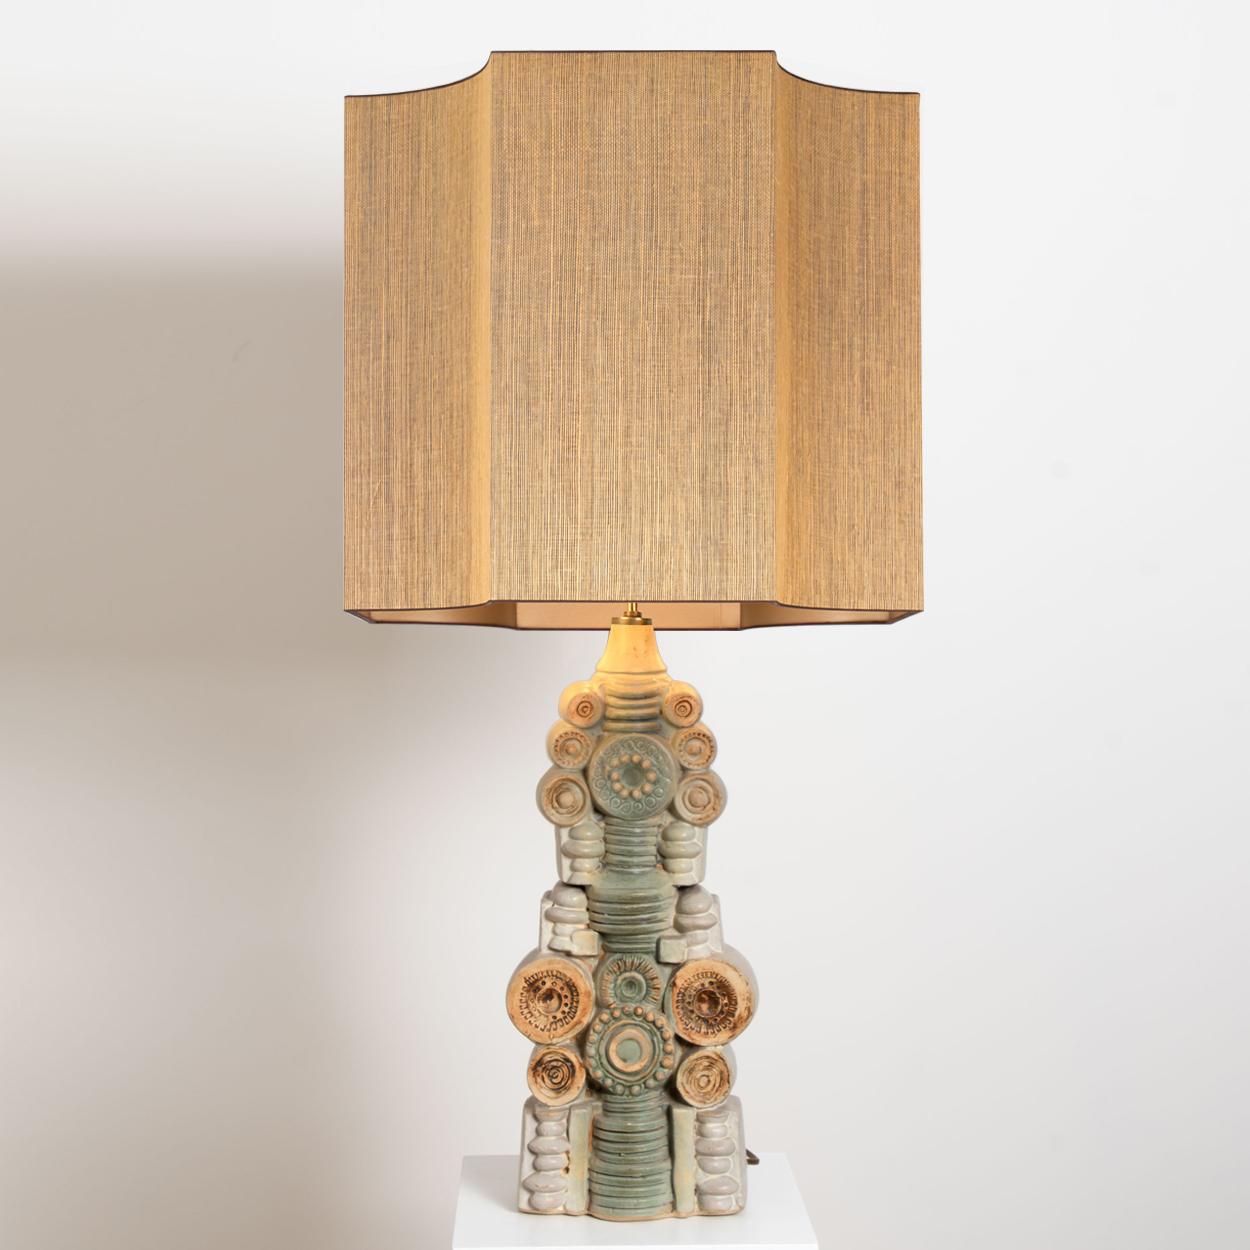 A rare large ceramic table lamp by Bernard Rooke, England, 1960s. Sculptural piece, made of handmade ceramic elements in natural tones of terracotta and stone. With a special custom made lamp shade by René Houben. With warm bronze or gold